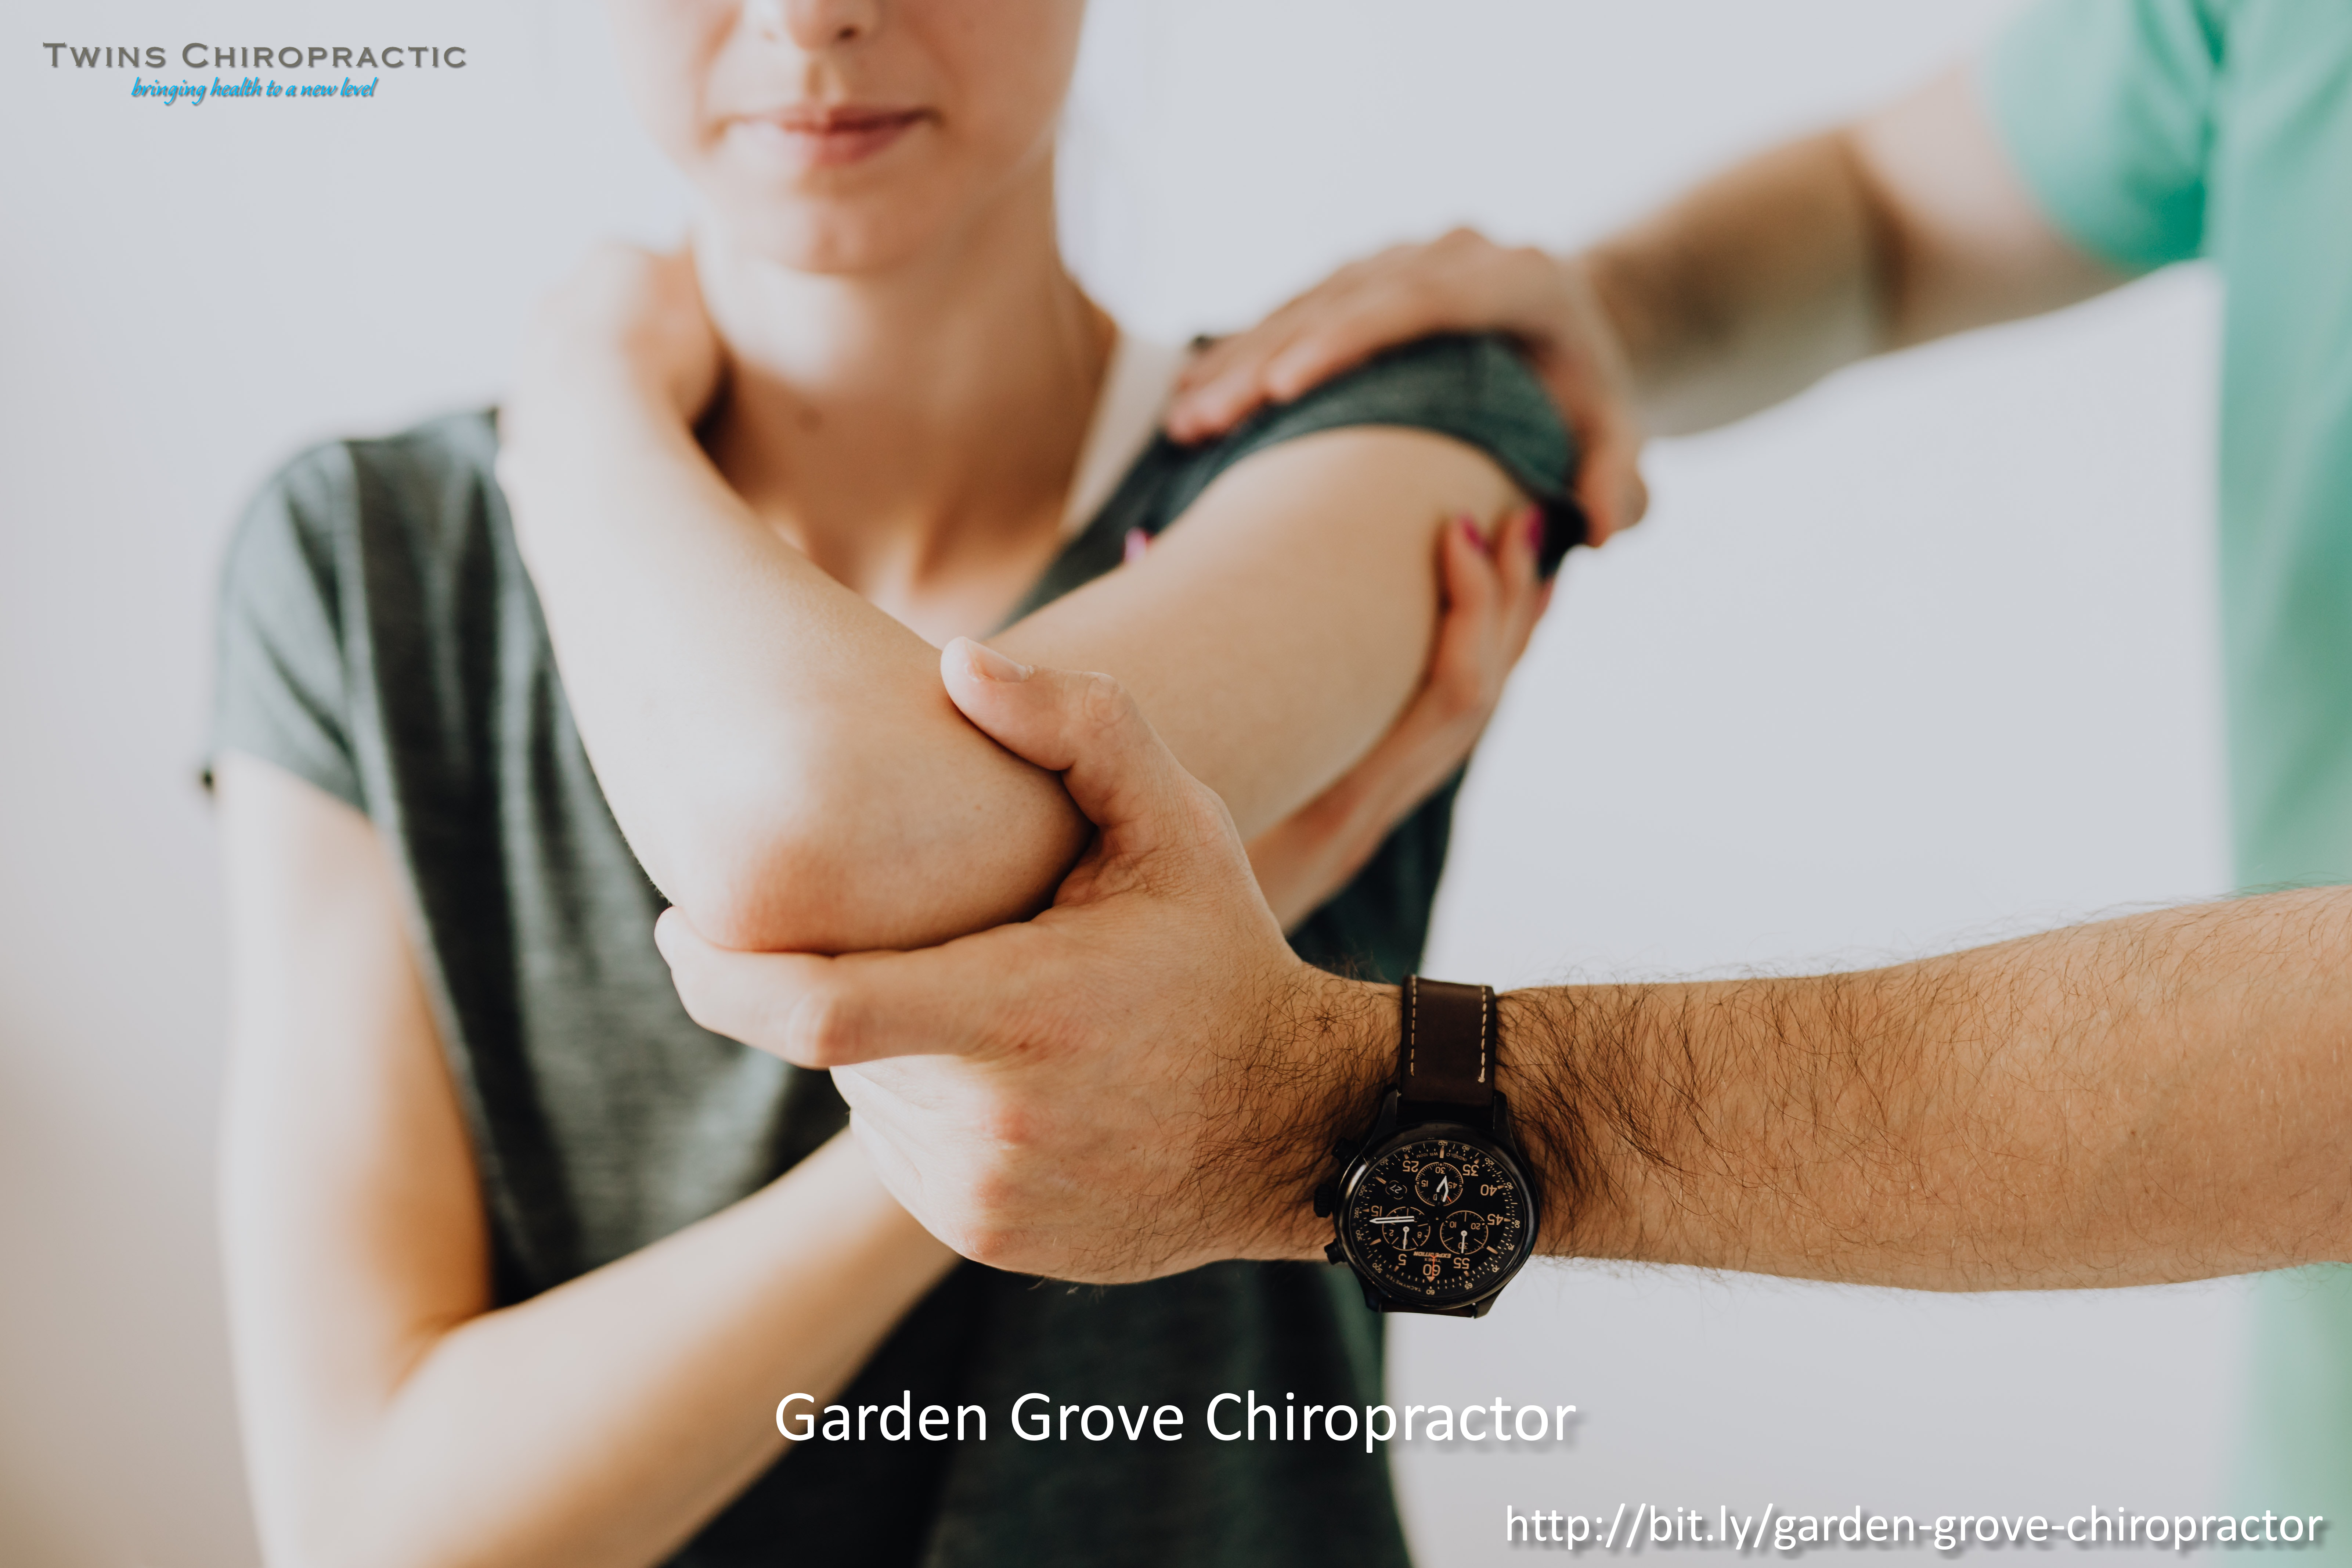 Twins Chiropractic Explains the Benefits Of Seeking Chiropractic Adjustment Services From A Qualified Chiropractor.